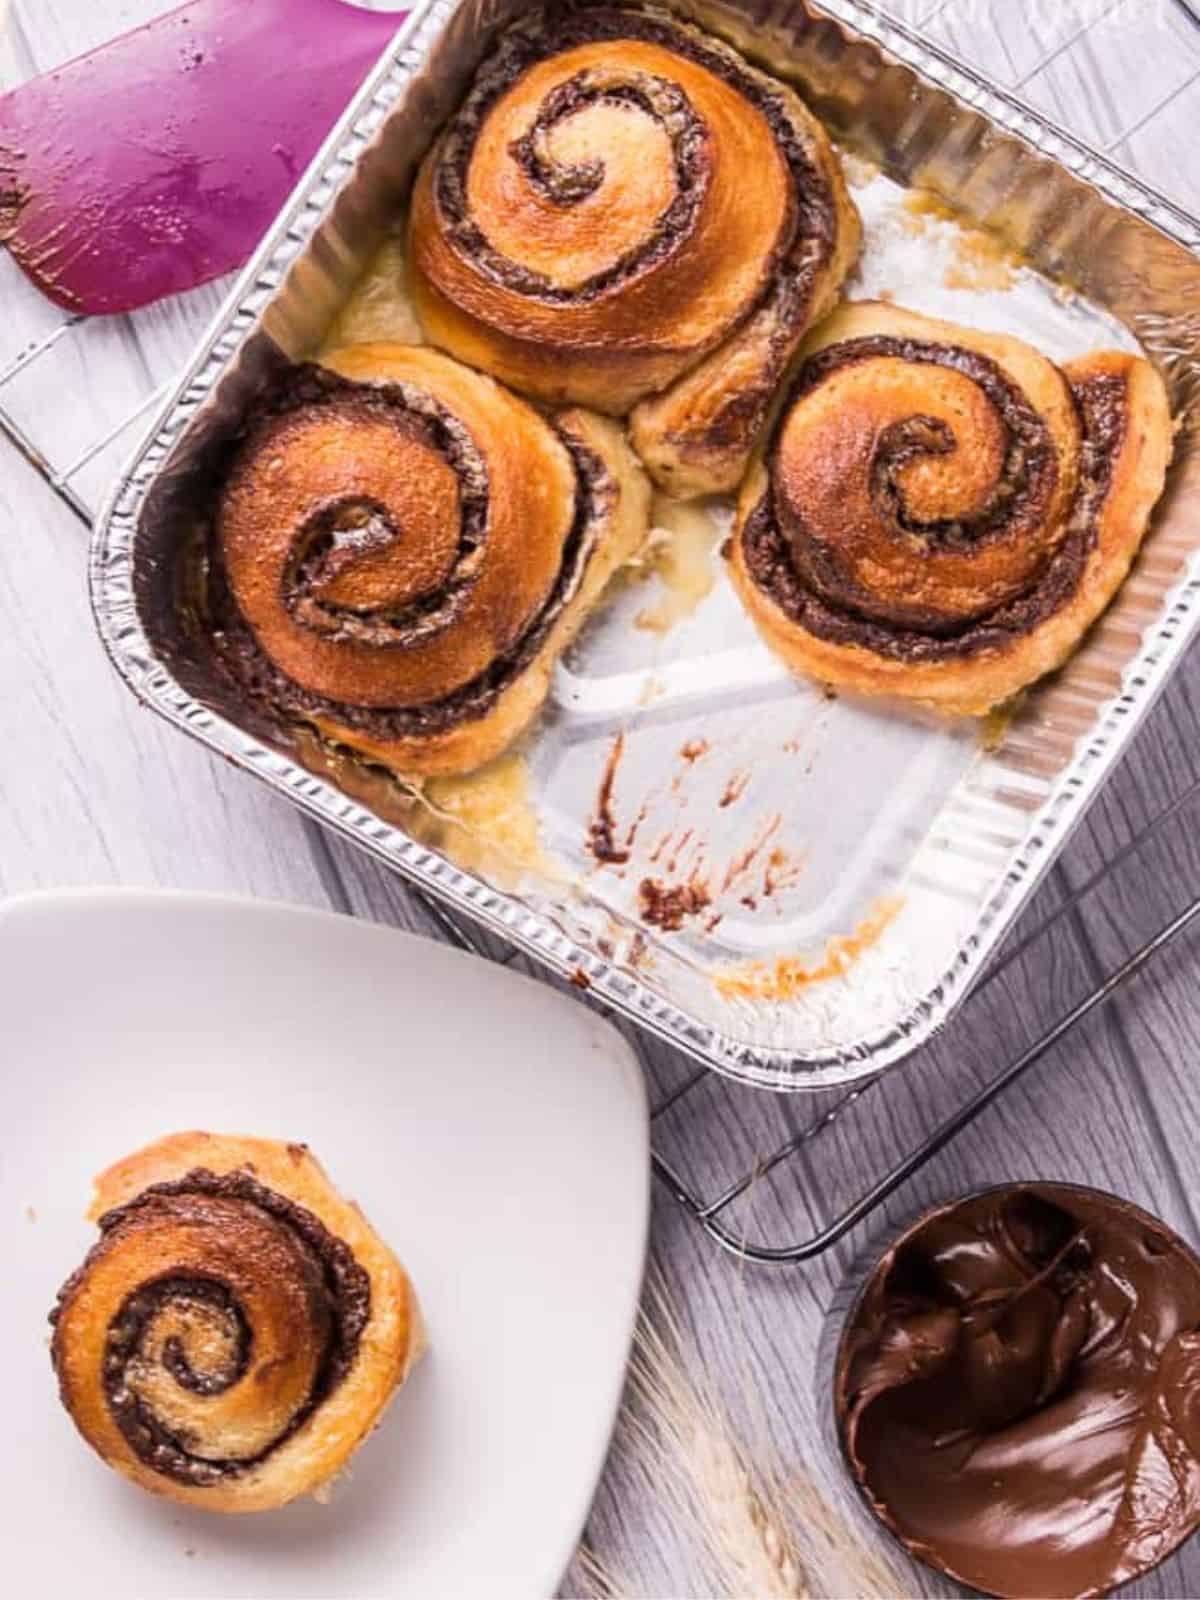 Nutella roll buns made with soft and moist buns with a creamy Nutella filling inside.